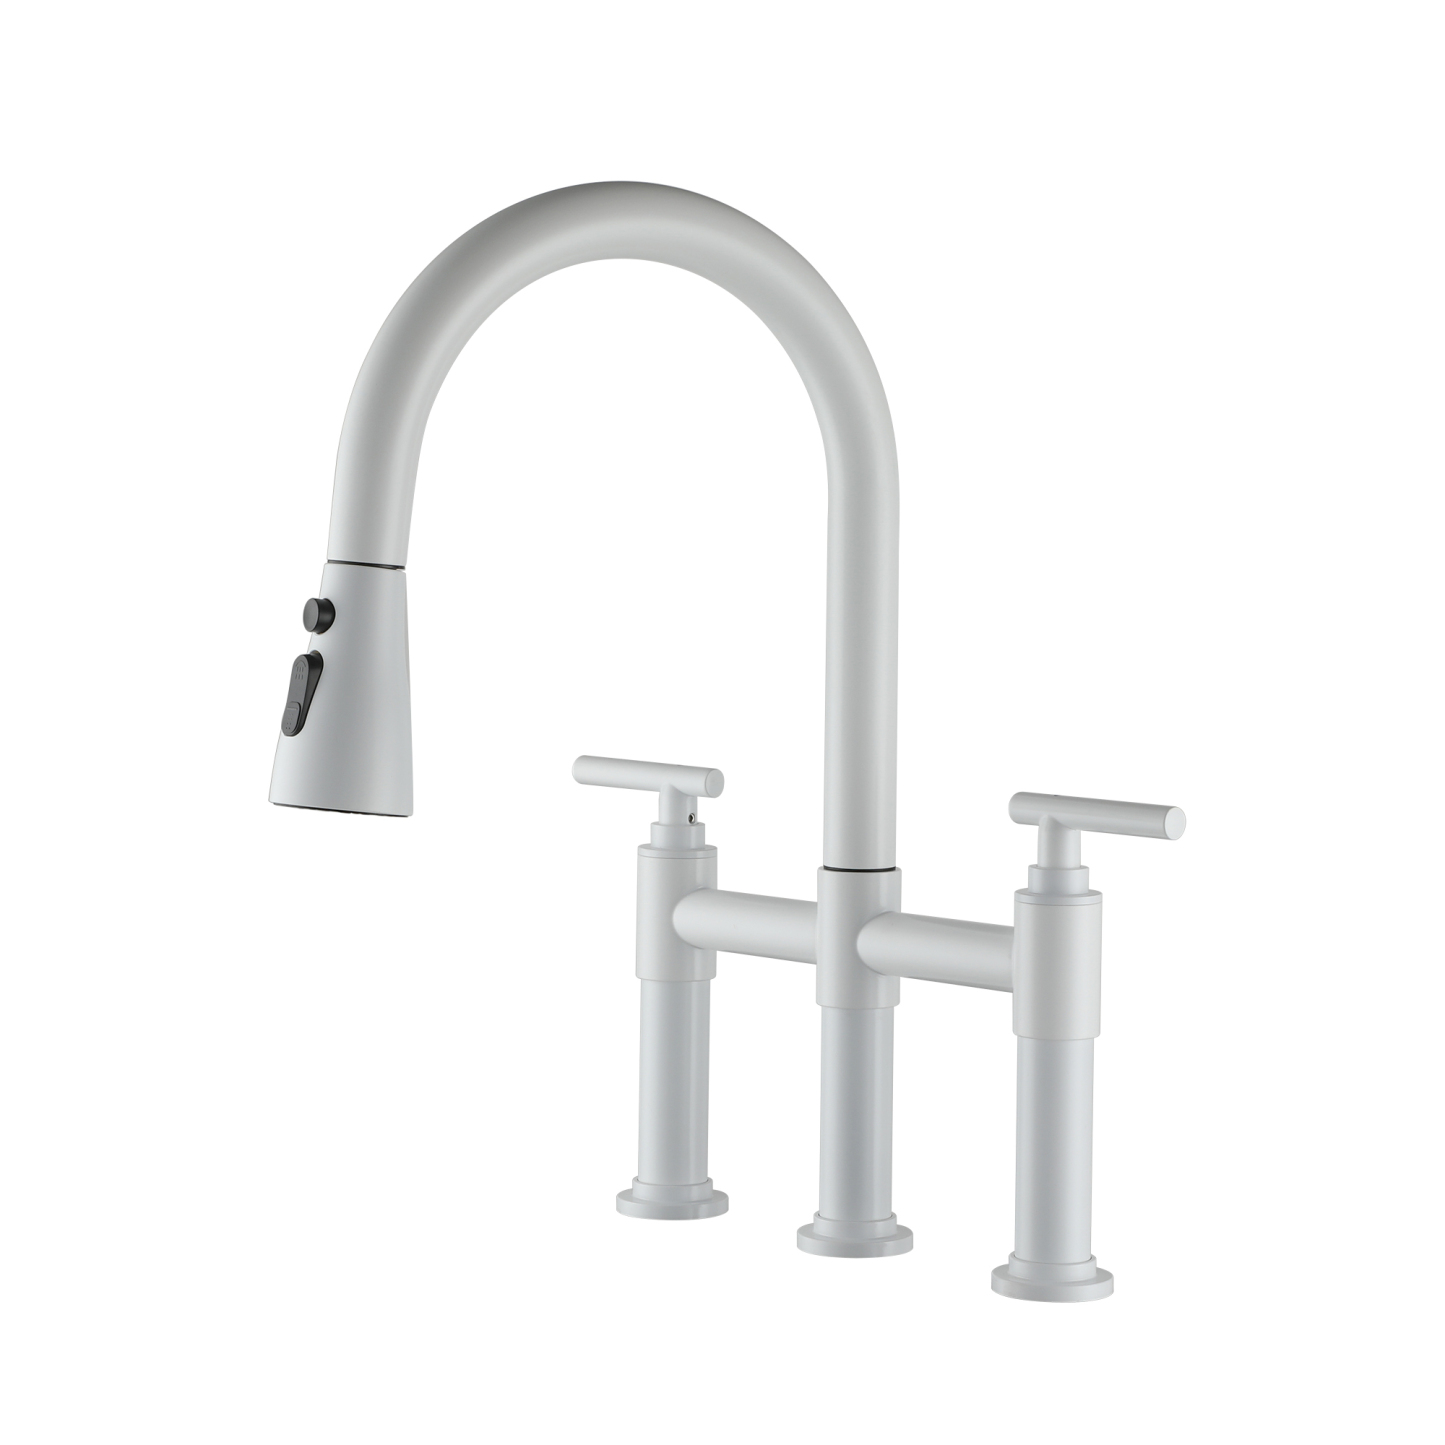 Bridge Kitchen Faucet with 3 Way Spray Function in Brushed Nickel Blac